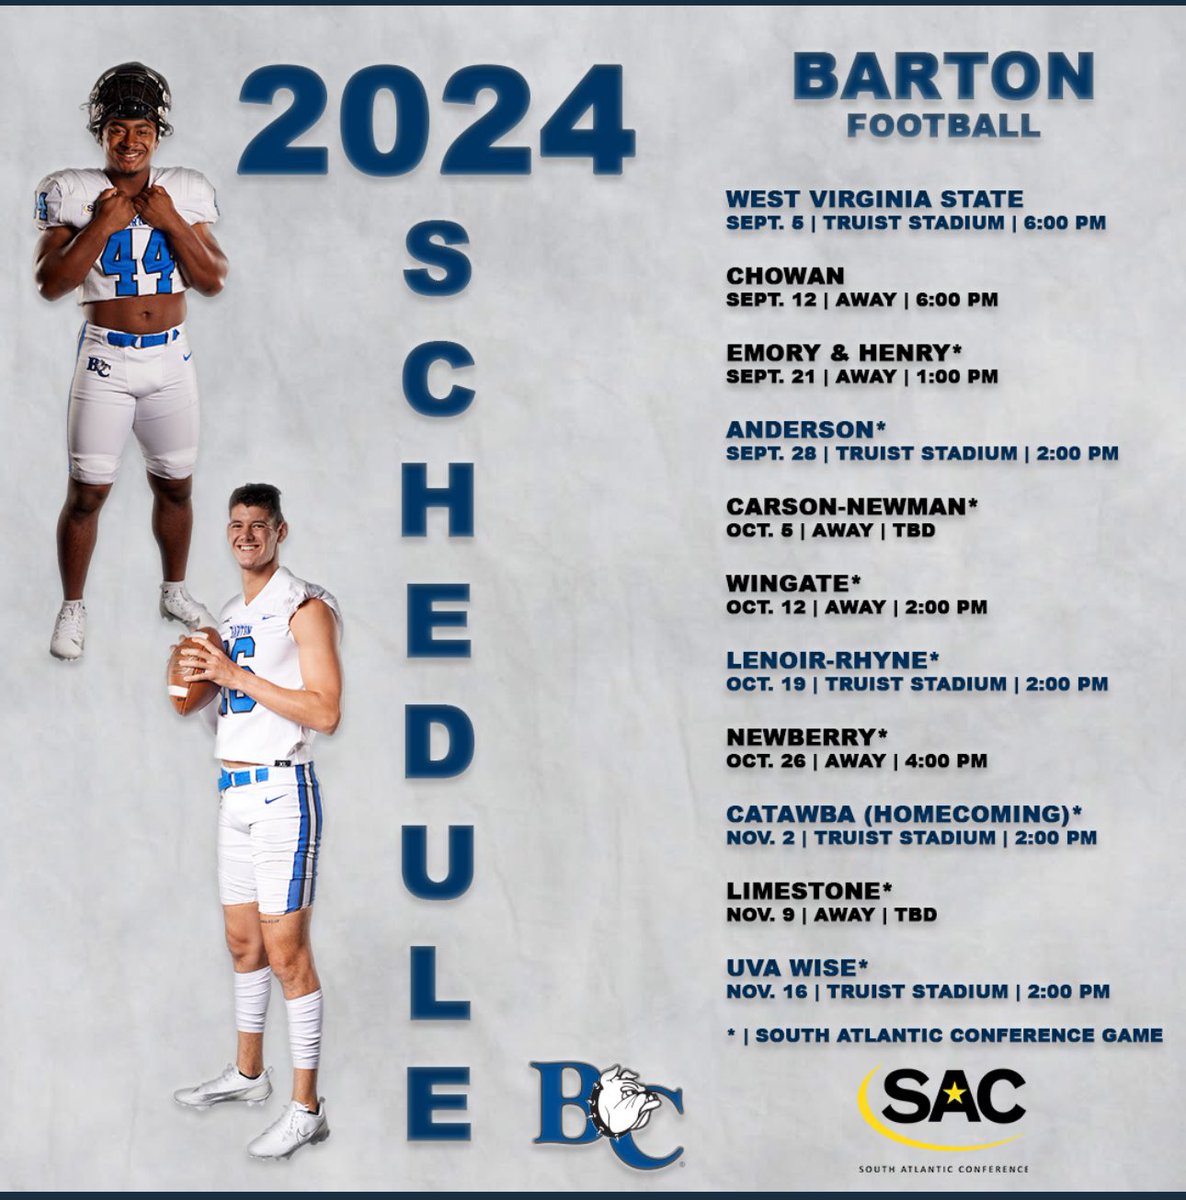 The official 2024 schedule is out!! #BeUncommon